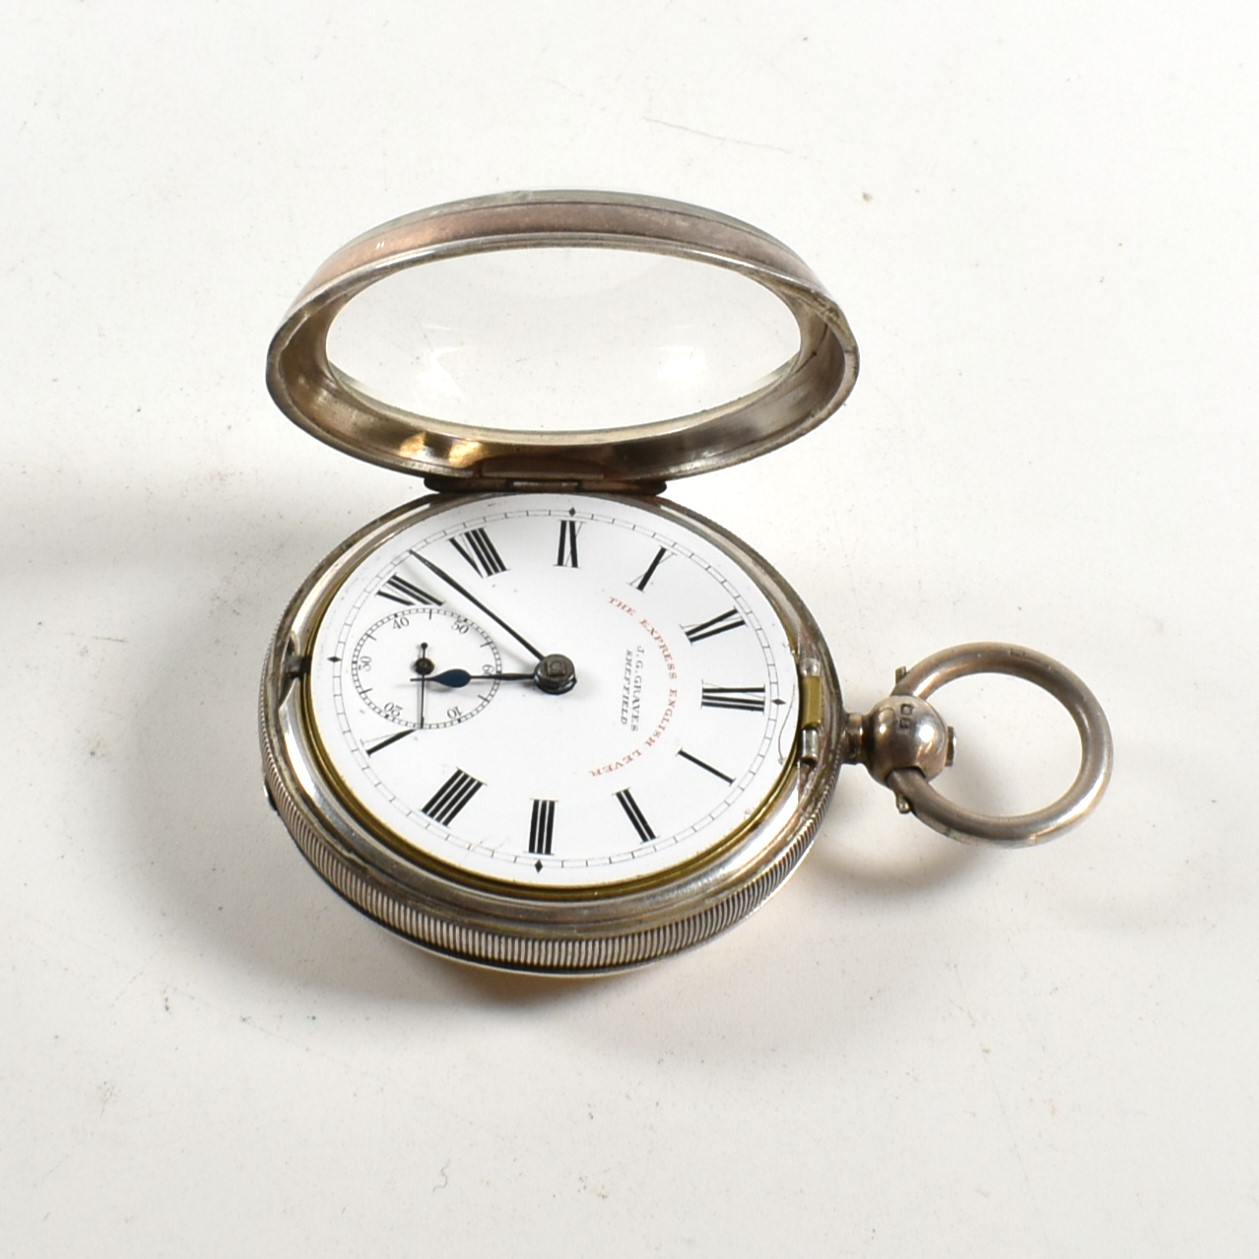 SILVER HALLMARKED JG GRAVES OPEN FACED POCKET WATCH - Image 3 of 8